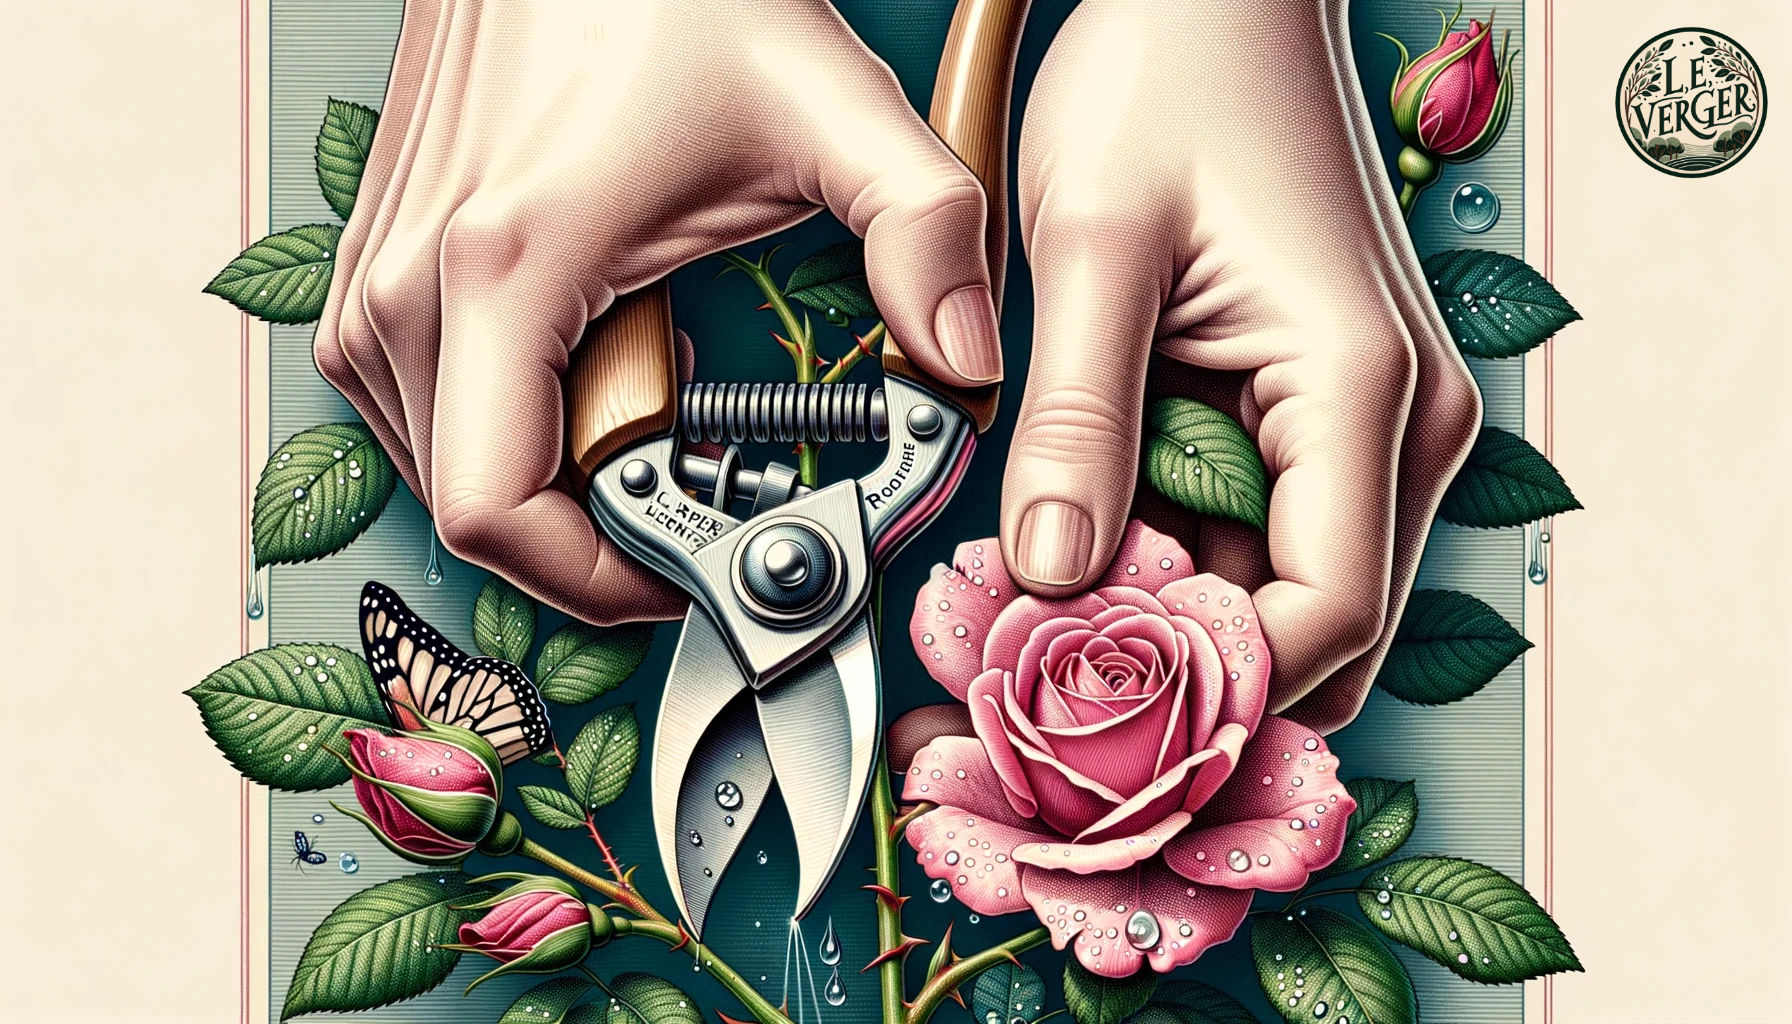 Illustration, wide aspect: A close-up of a pair of hands, belonging to a Caucasian female, holding a pair of shiny pruning shears, ready to make a cut on a rose stem. Dewdrops glisten on the plant, and a butterfly flits nearby. Above this scene, the title 'L.E. Verger's Pruning Essentials Guide' is inscribed in a classic font.